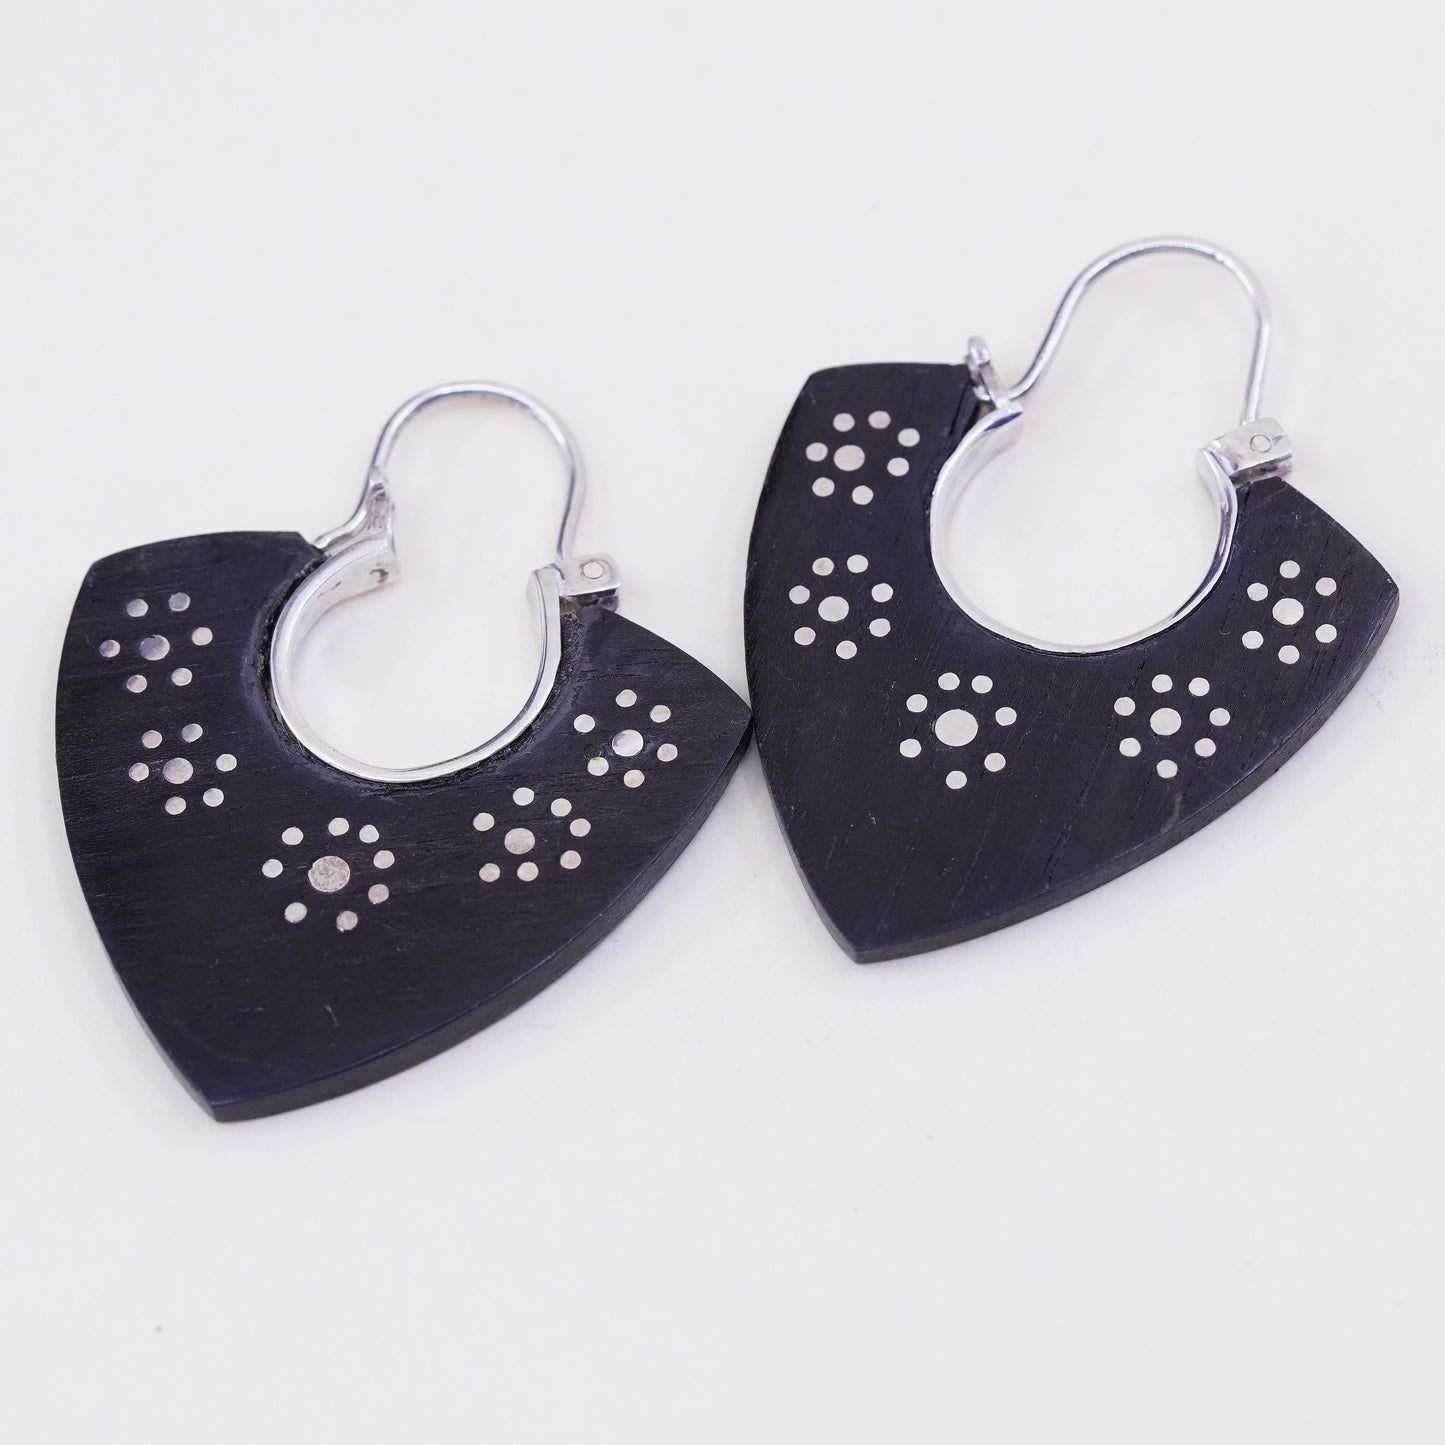 Vintage sterling 925 silver handmade earrings with black wood and flower dots